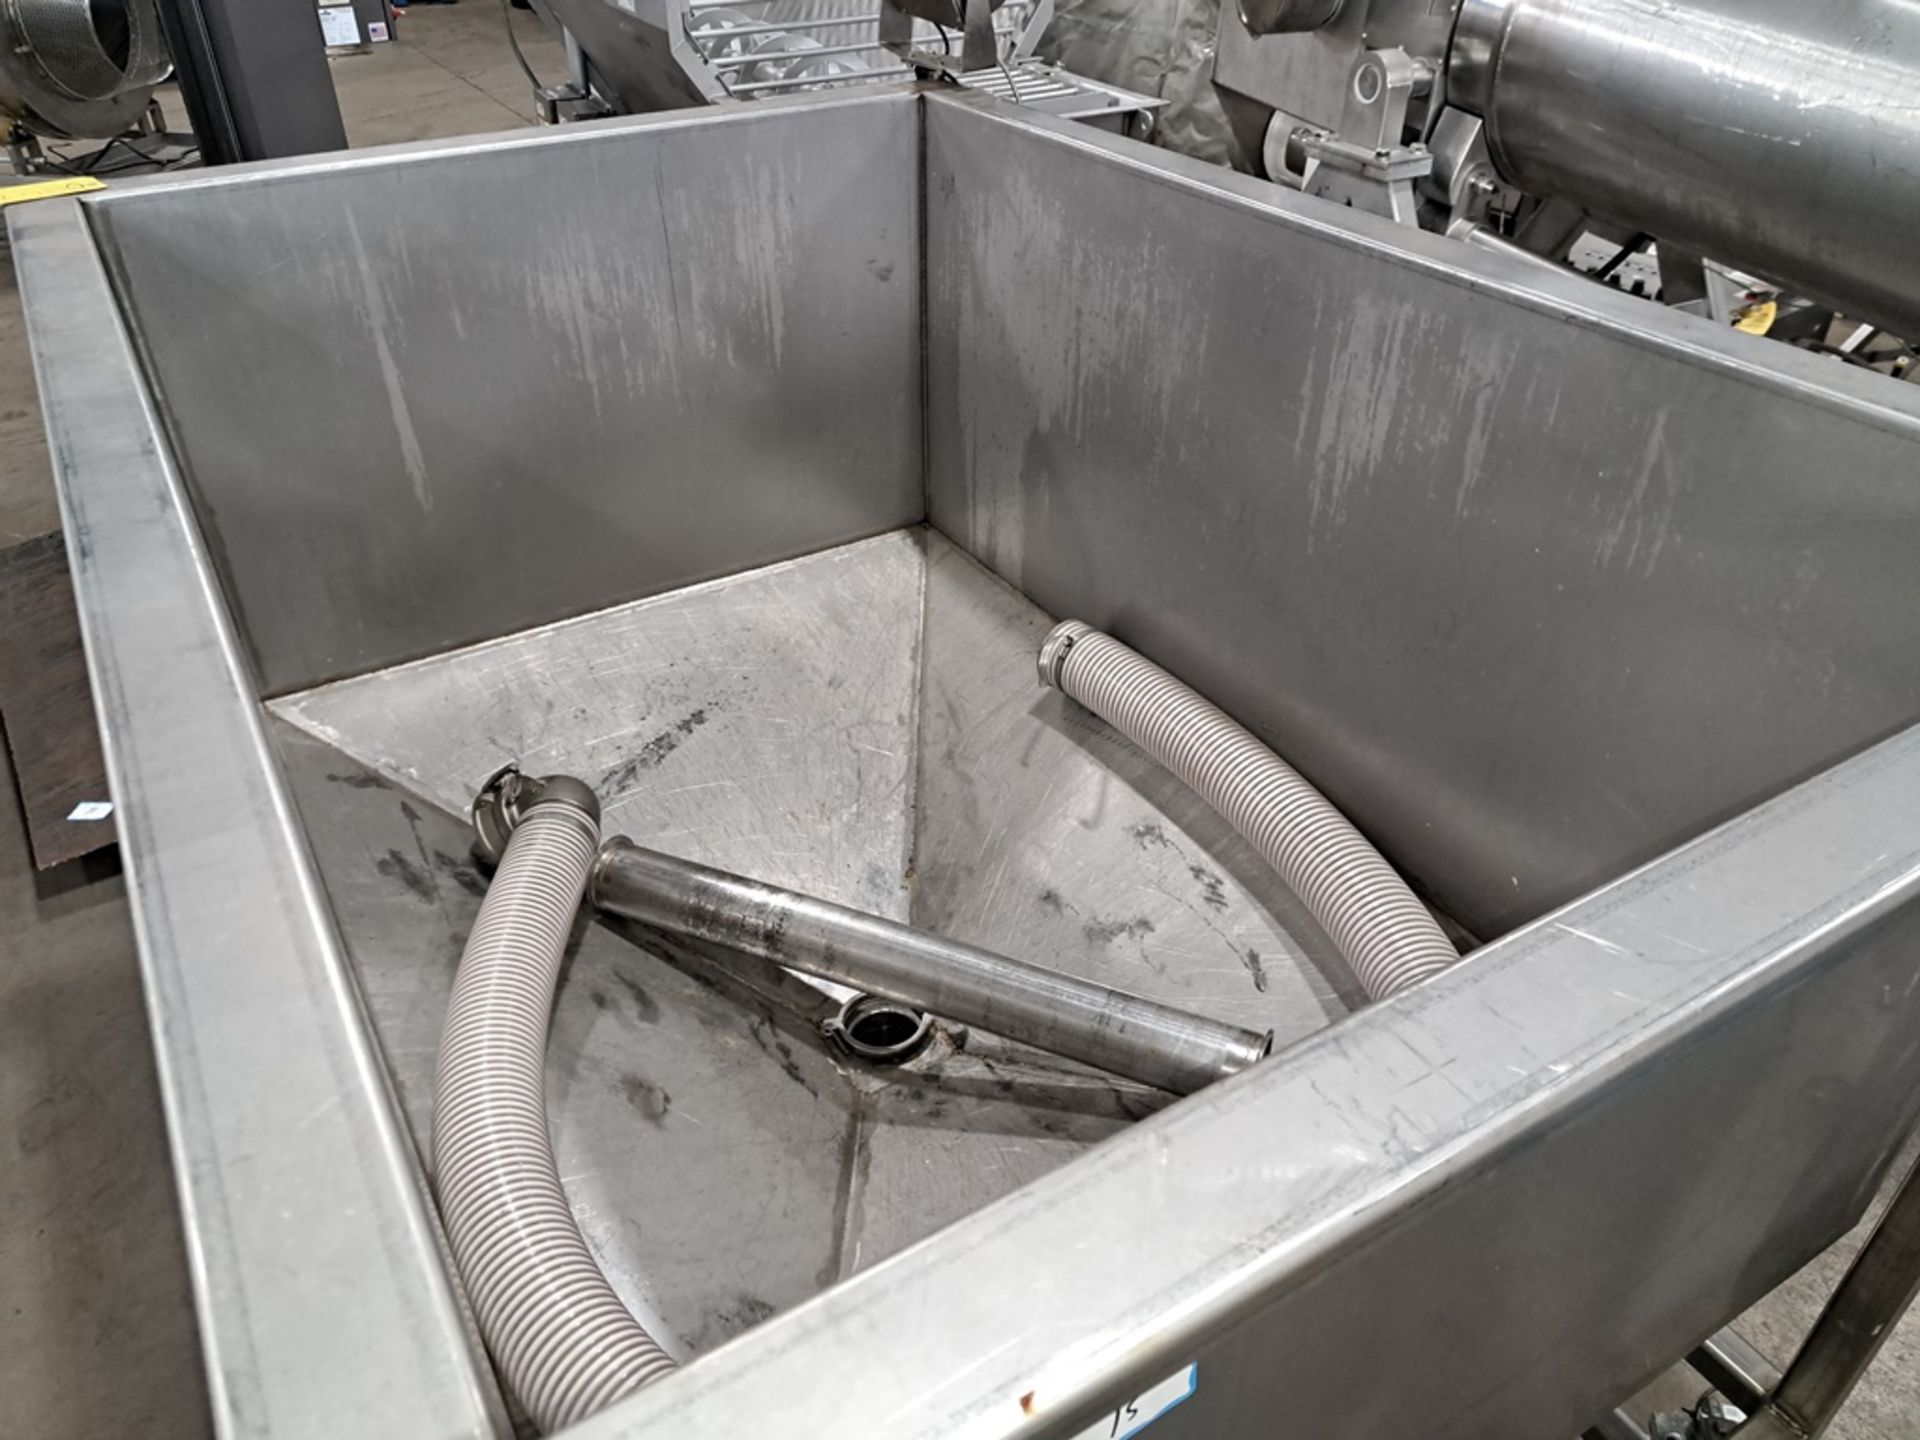 Stainless Steel Vacuum Load Hopper, 4' wide X 6' long X 40" deep tapered bottom, 4" outlet, Optima - Image 3 of 6